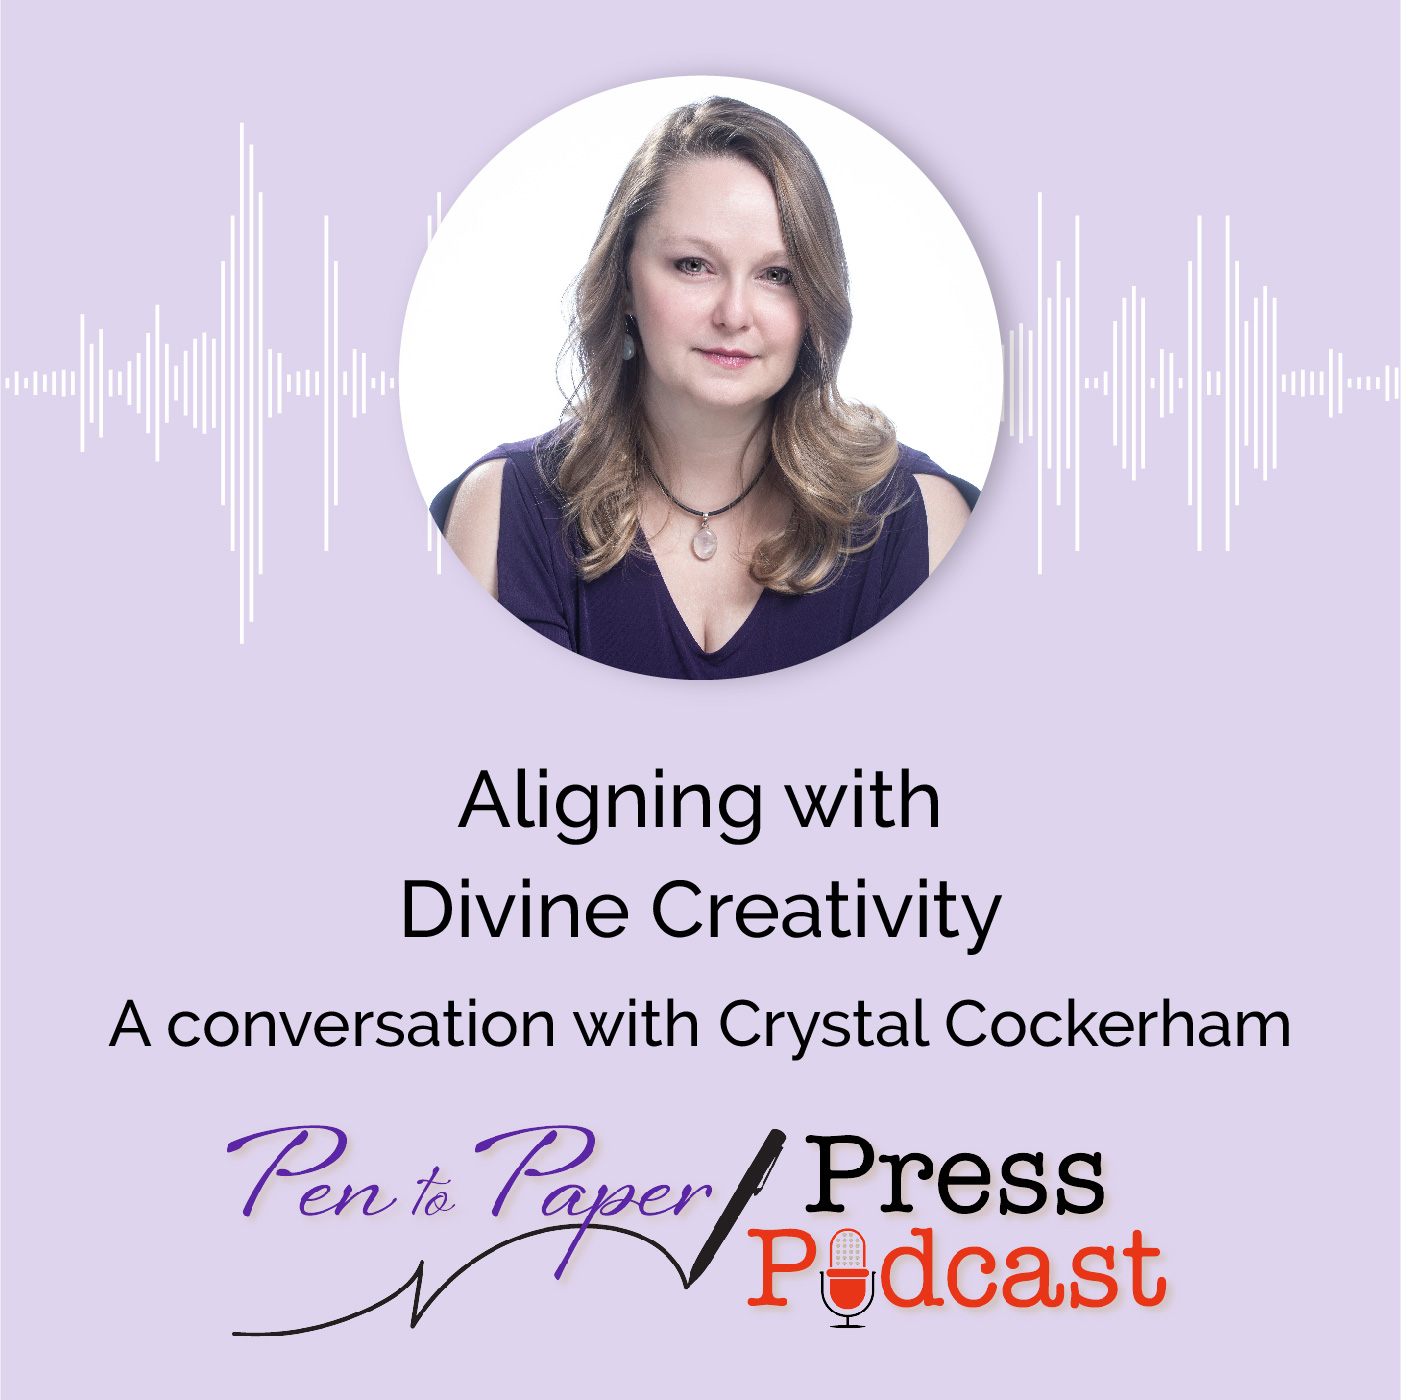 Aligning with Divine Creativity podcast cover